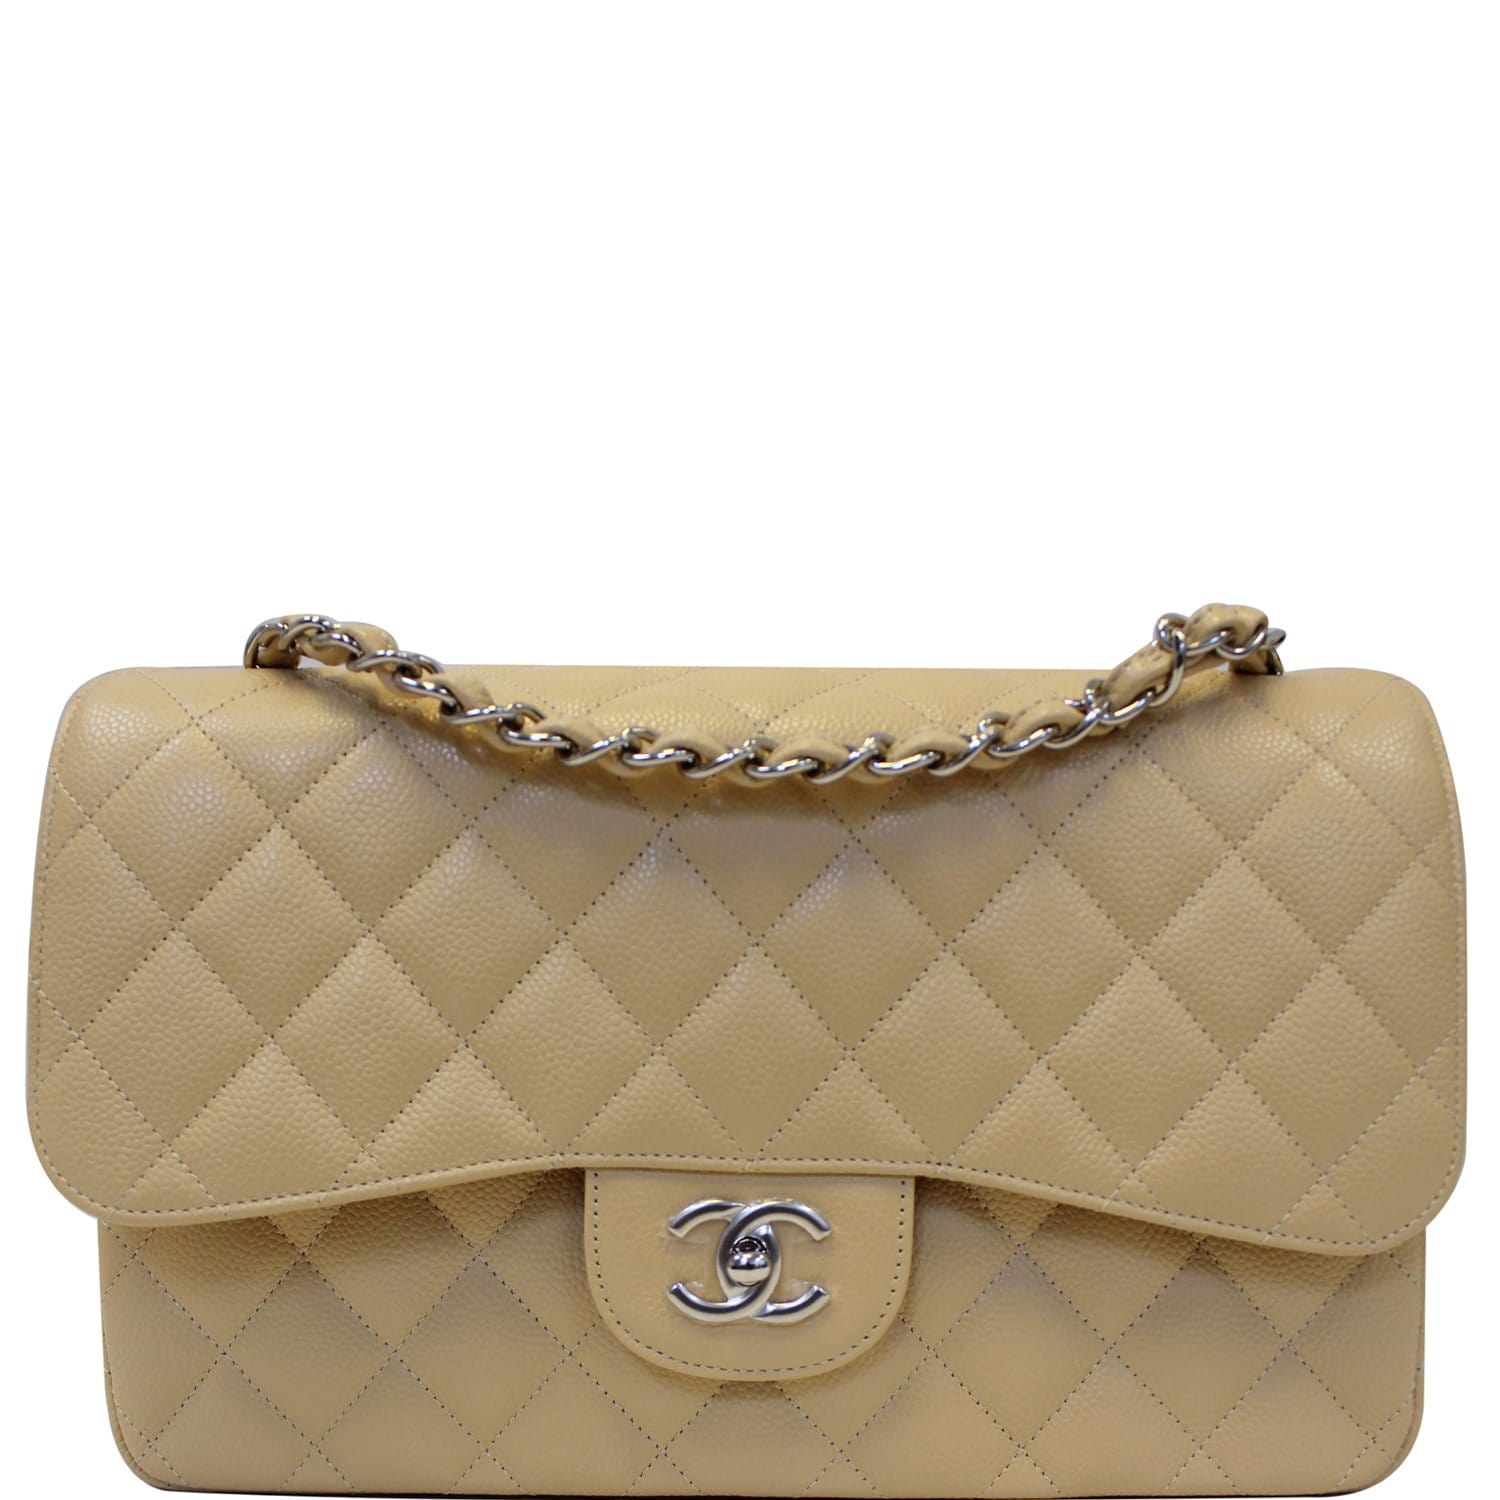 Chanel Classic Quilted Caviar Double Flap Large Bag in Pearlescent